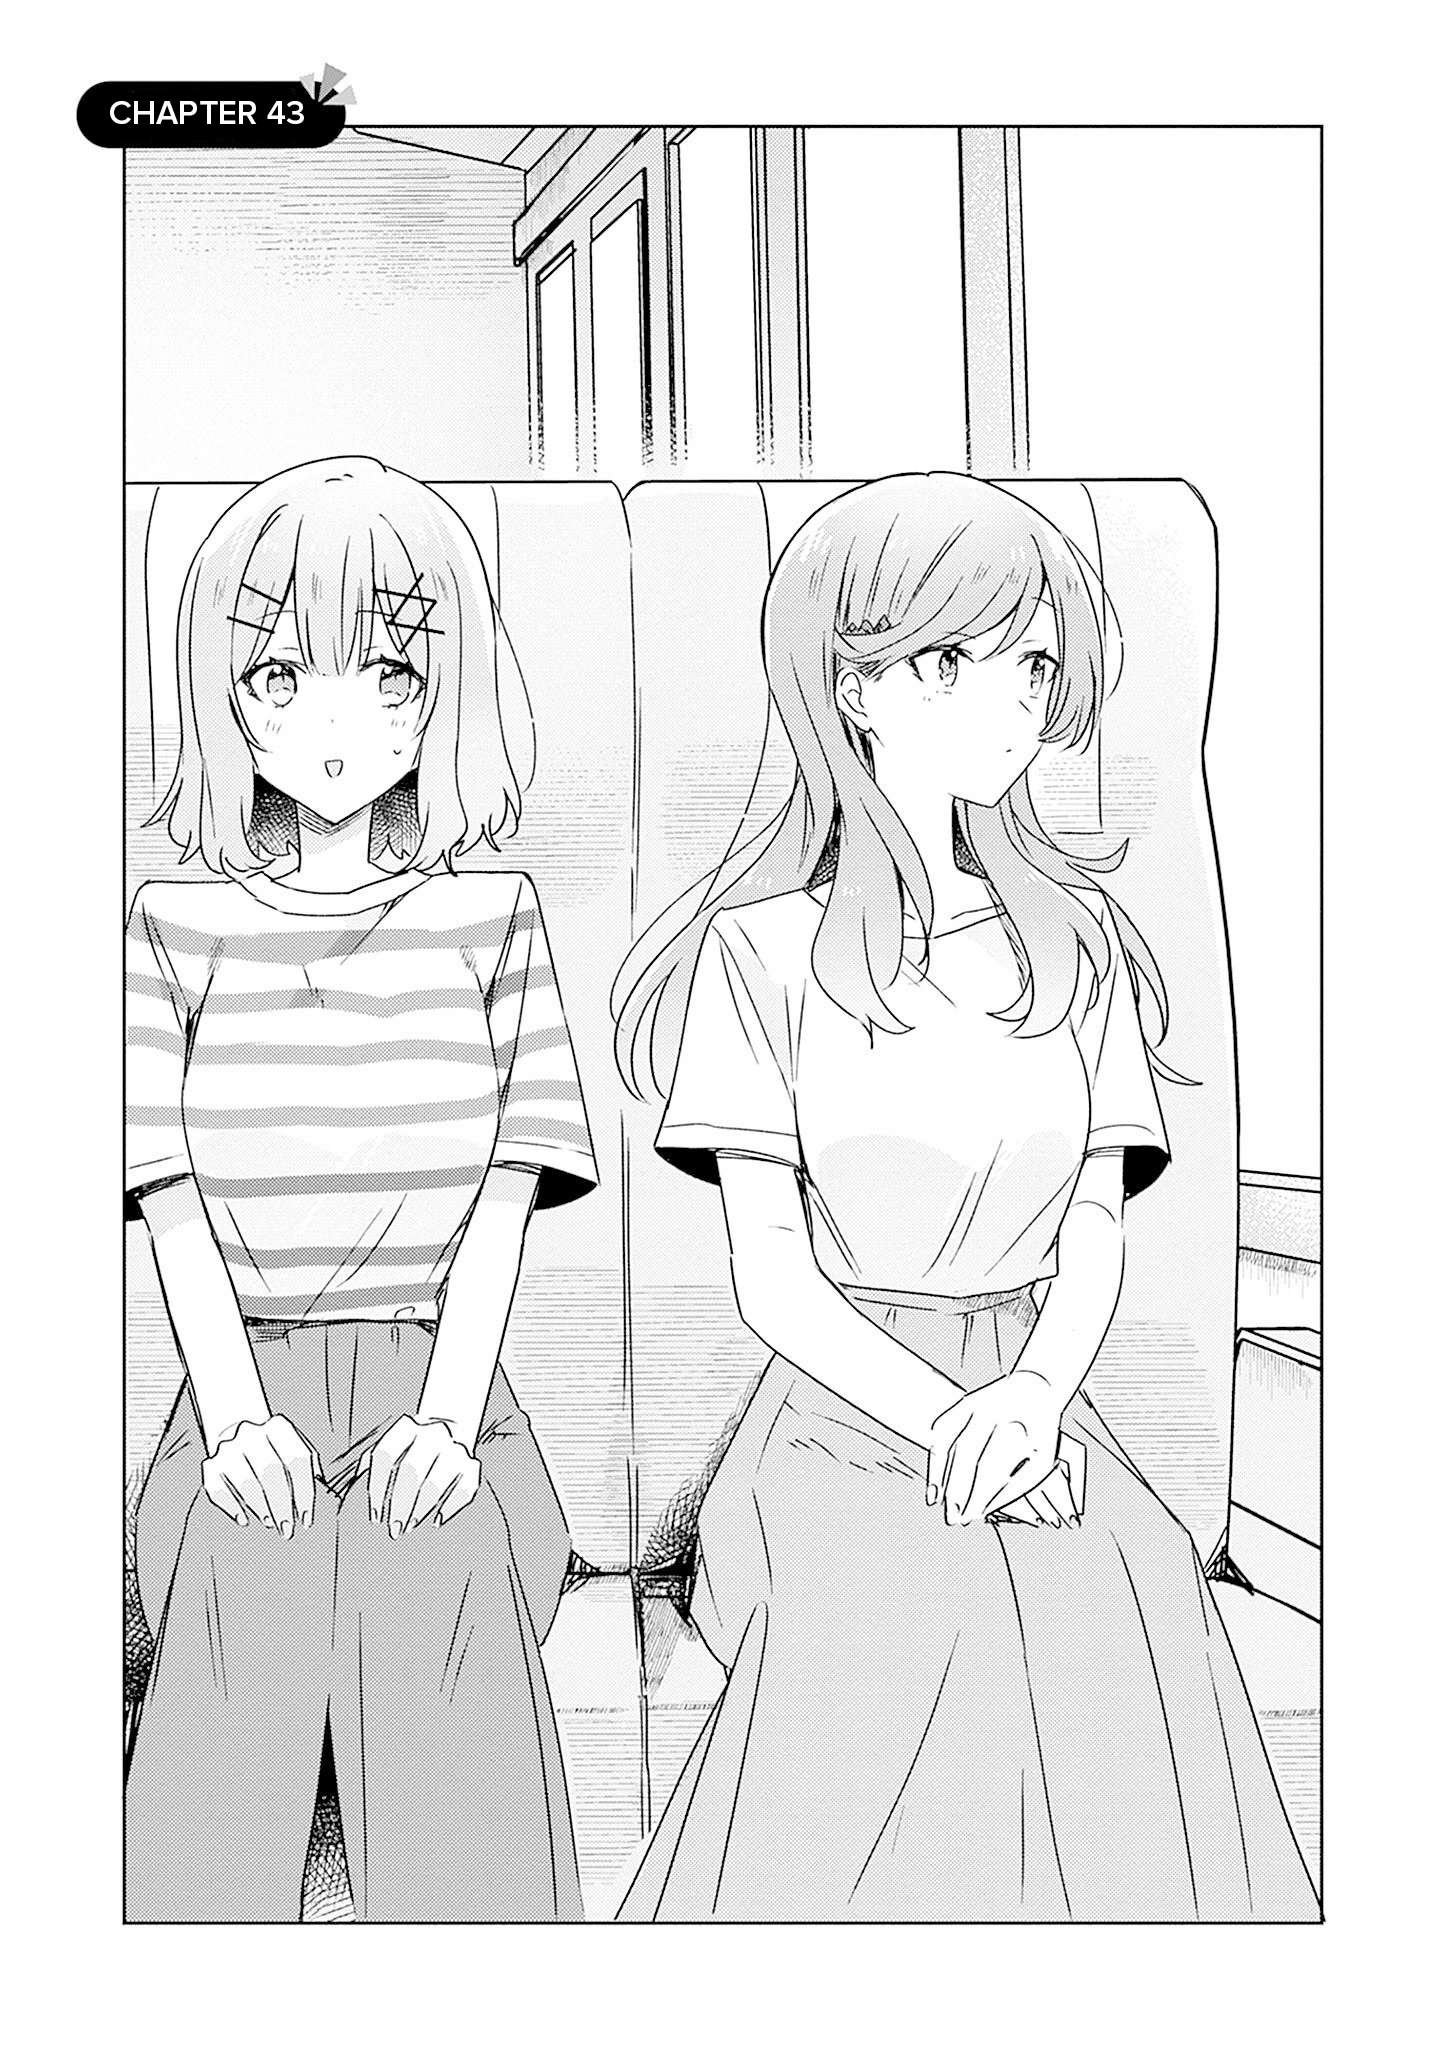 There's No Way I Can Have A Lover! *Or Maybe There Is? - chapter 43 - #1